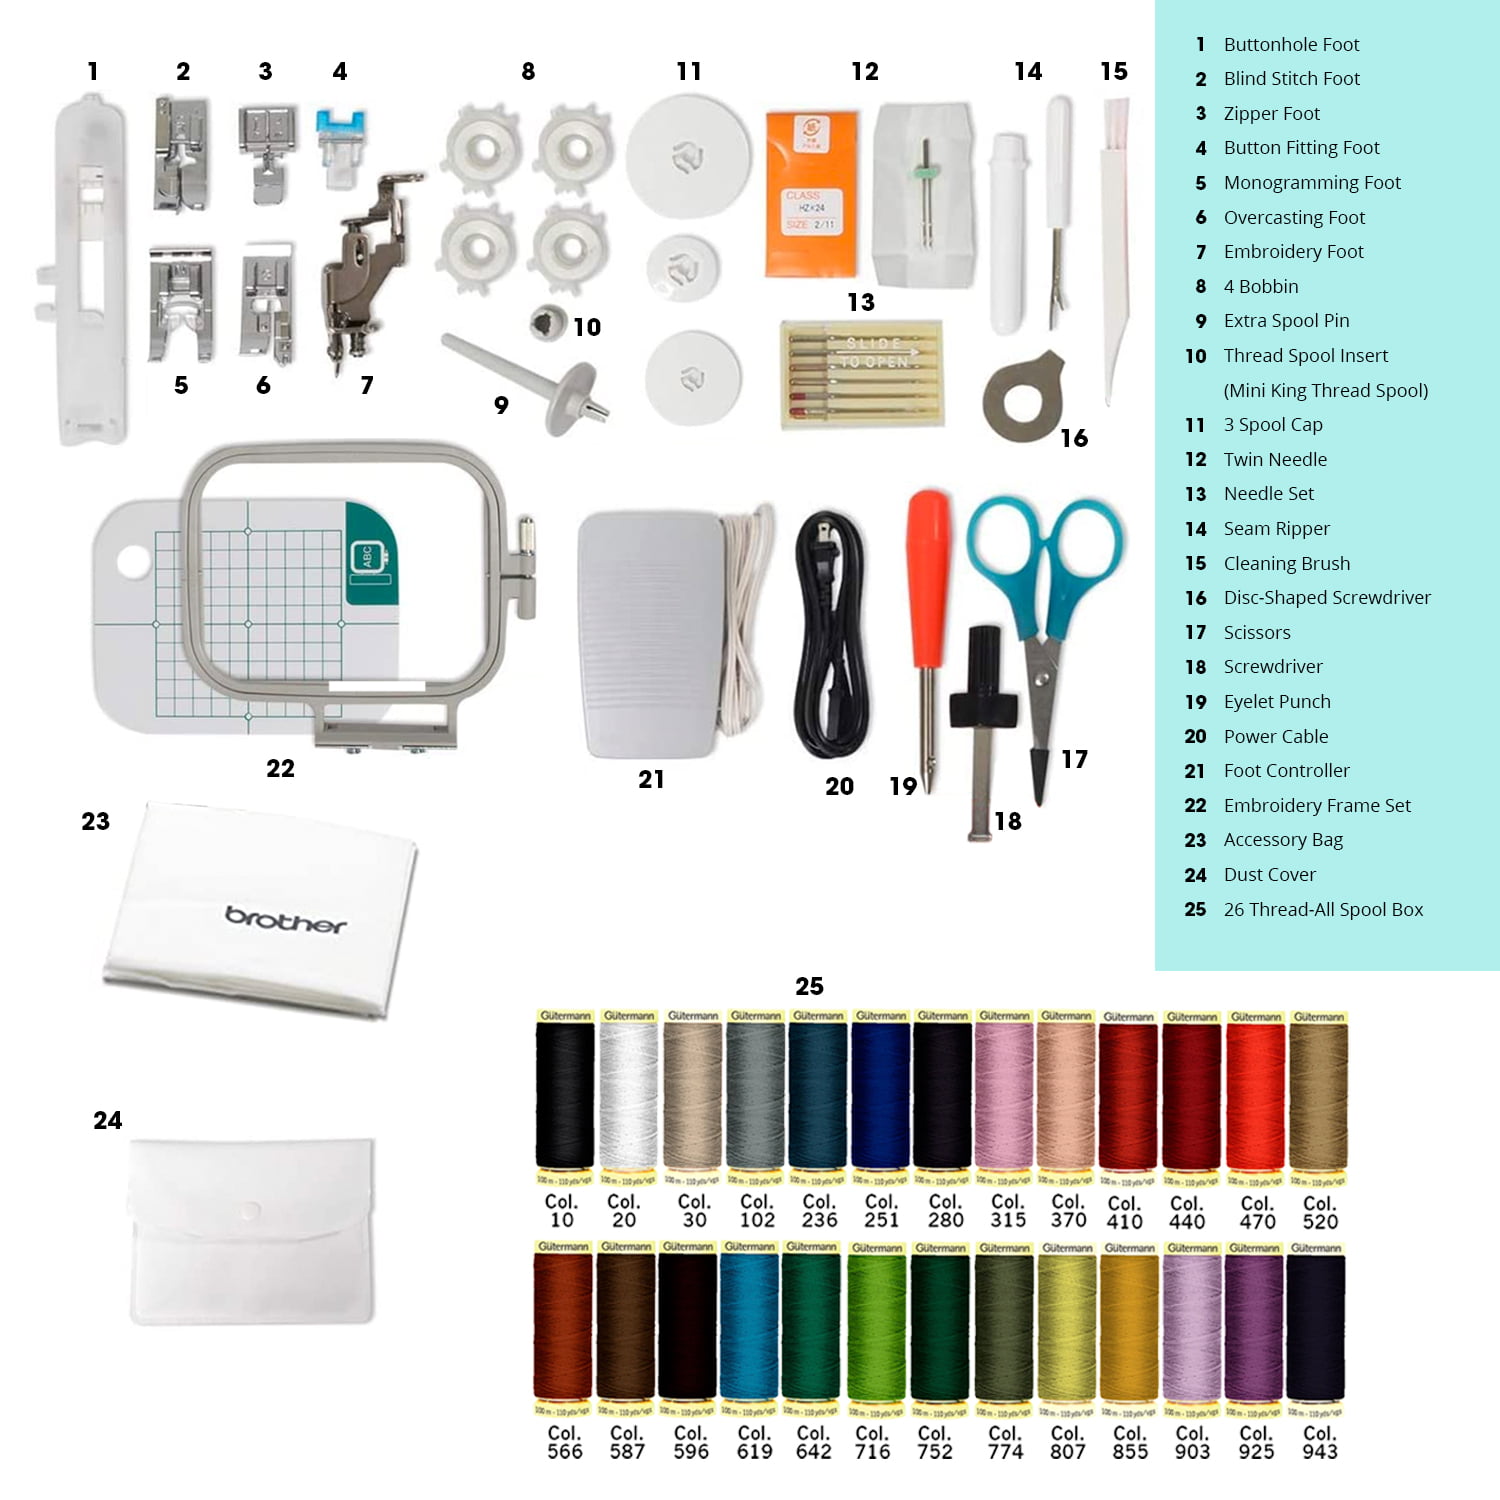 Sewing Starter Kit - Brother XR9550 Computerized Sewing Machine, LCD Screen  + 26 Gutermann Sewing Thread 100m Spools